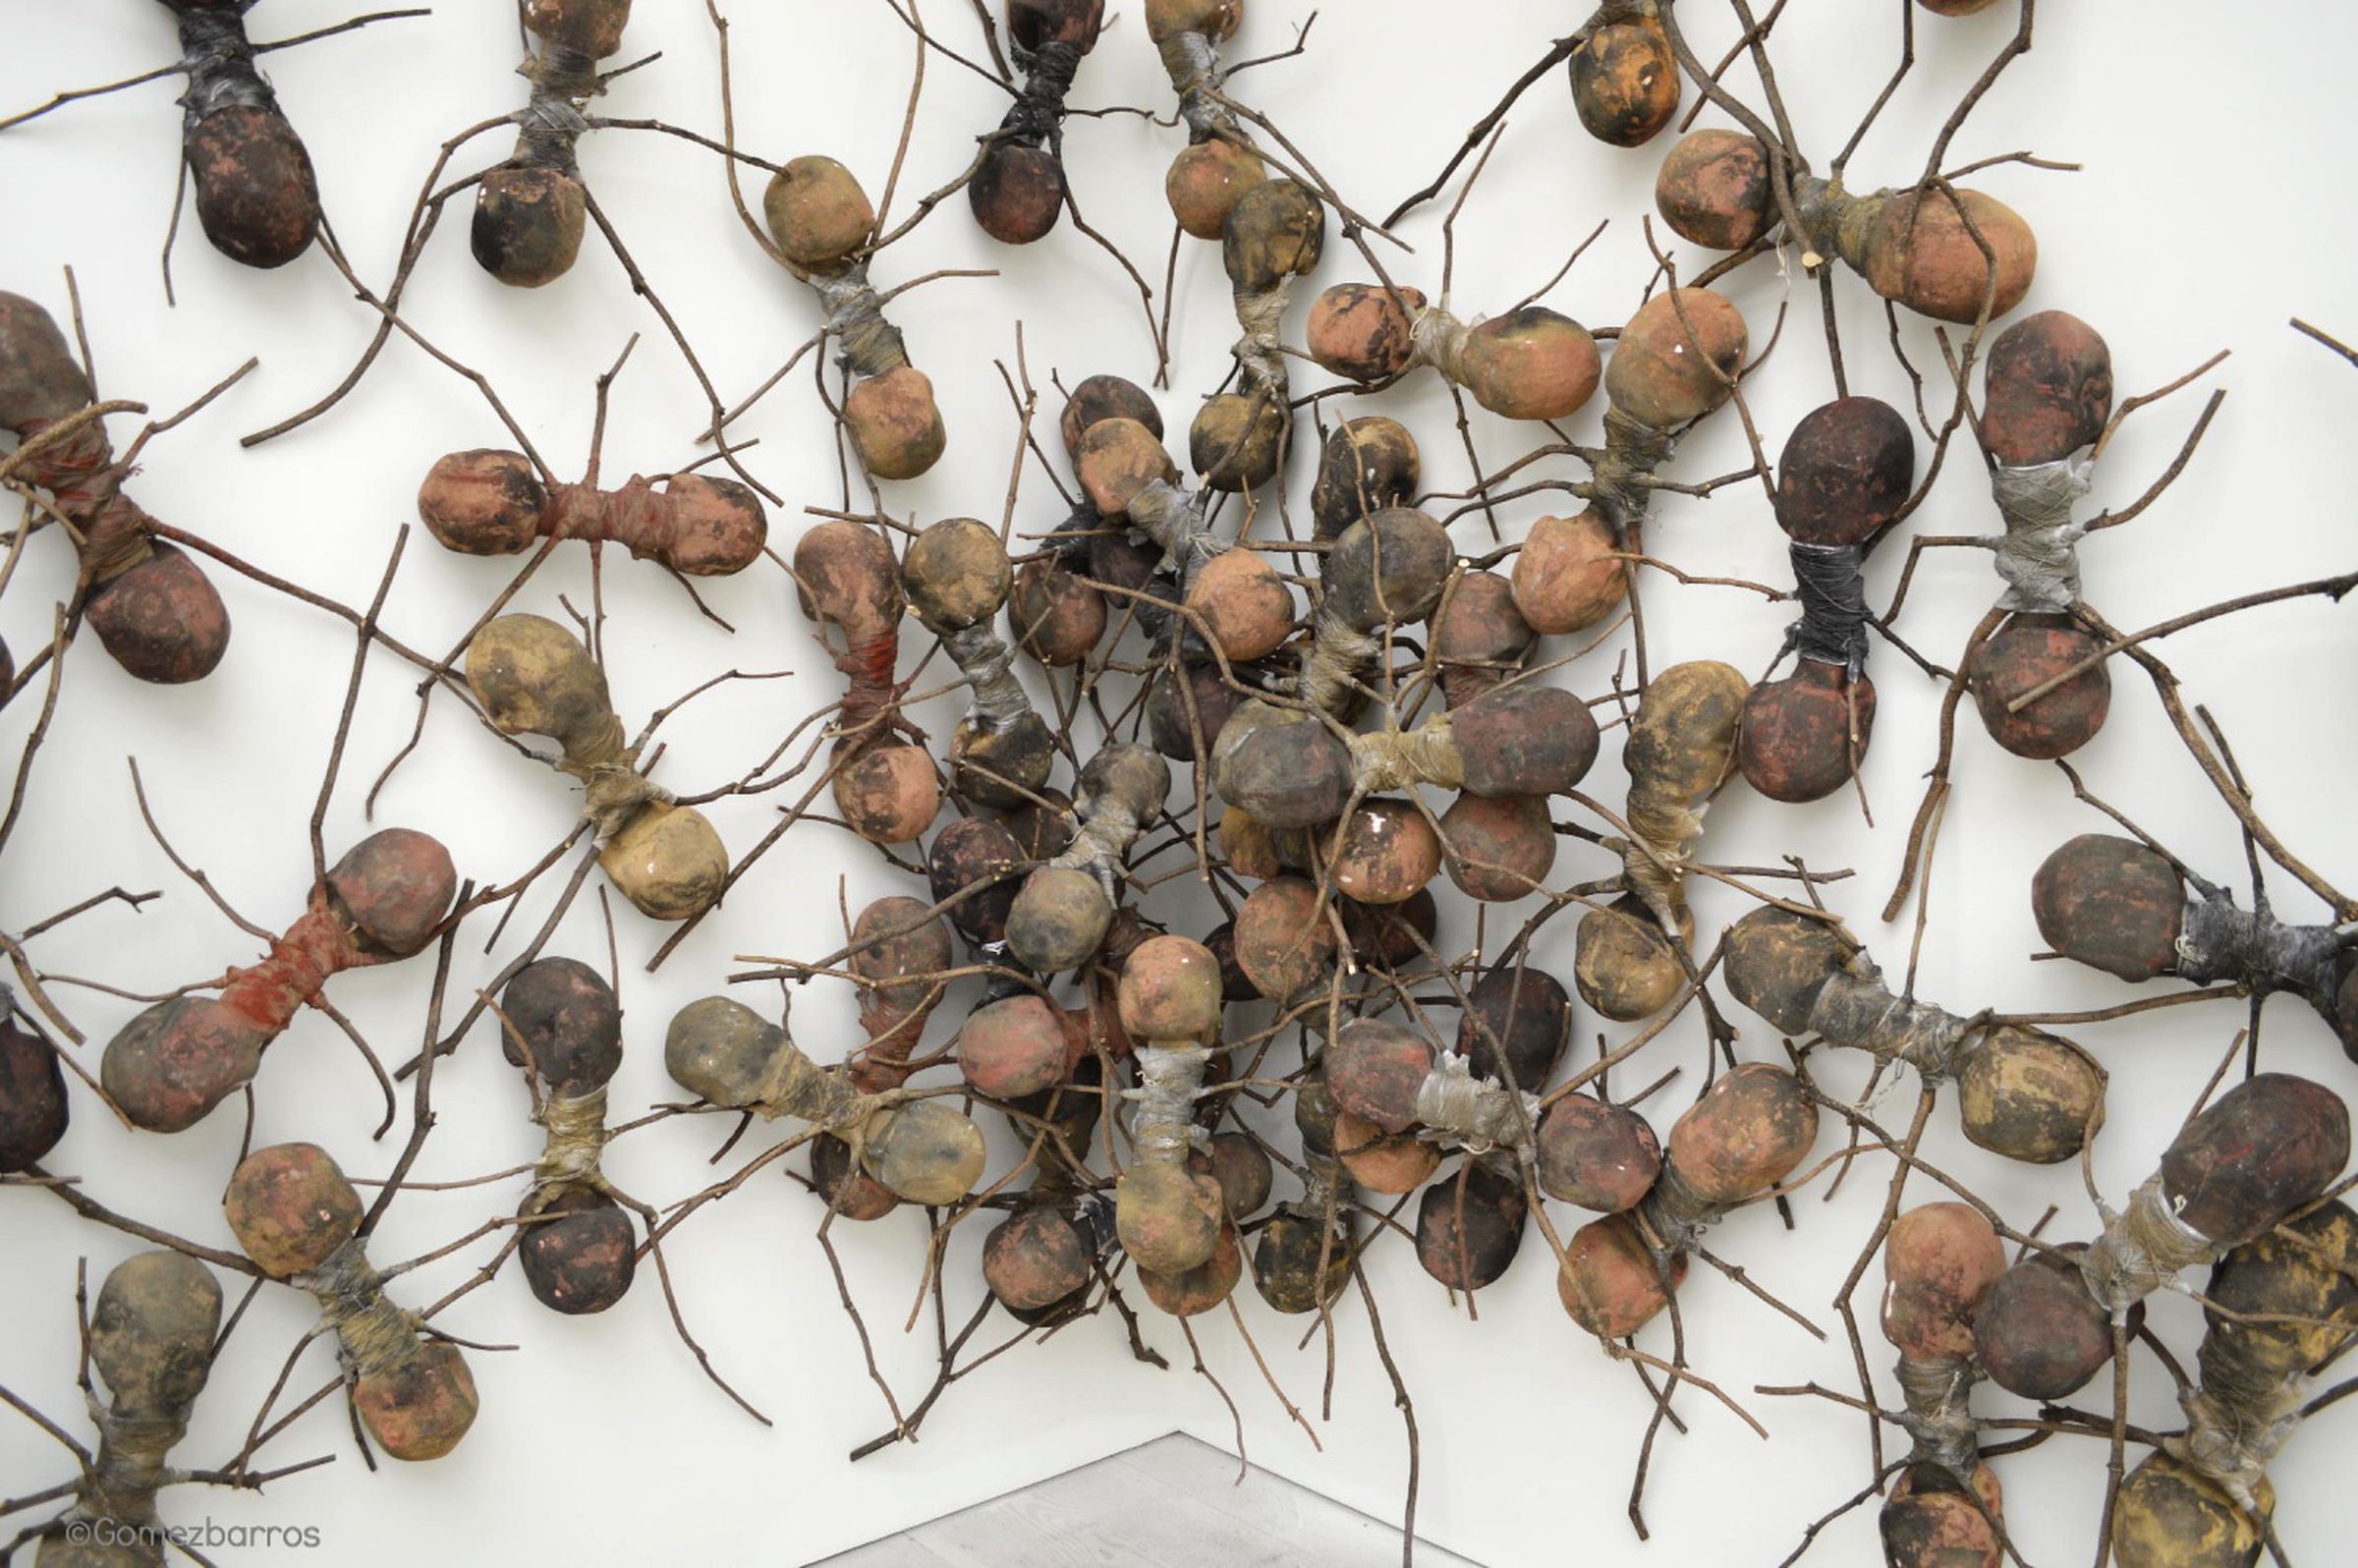 Colombia's giant ants